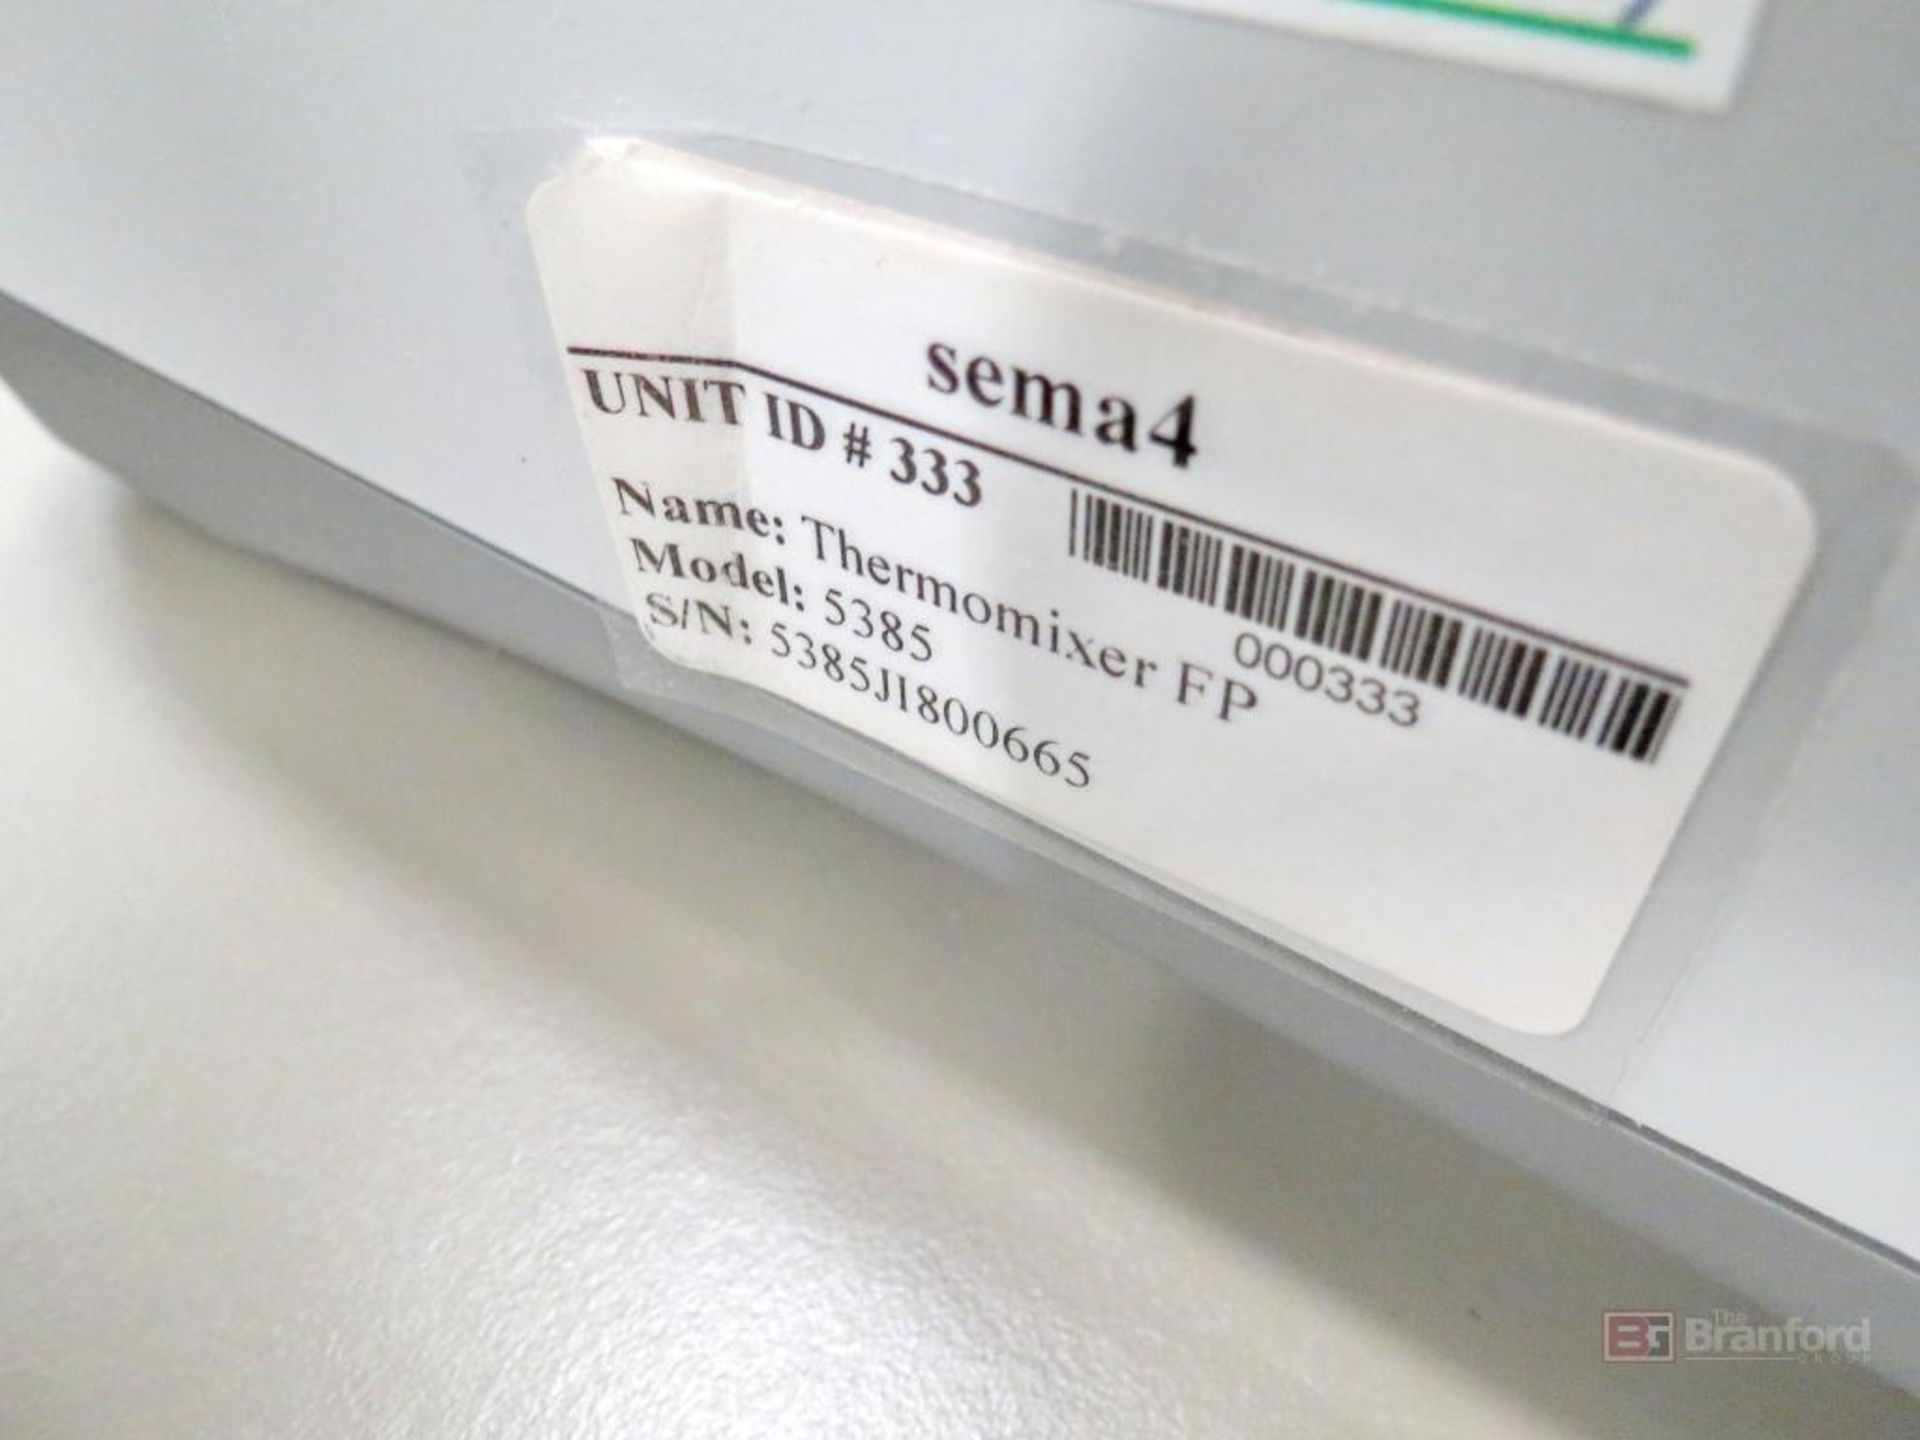 Eppendorf ThermoMixer FP 5385 - Image 2 of 2